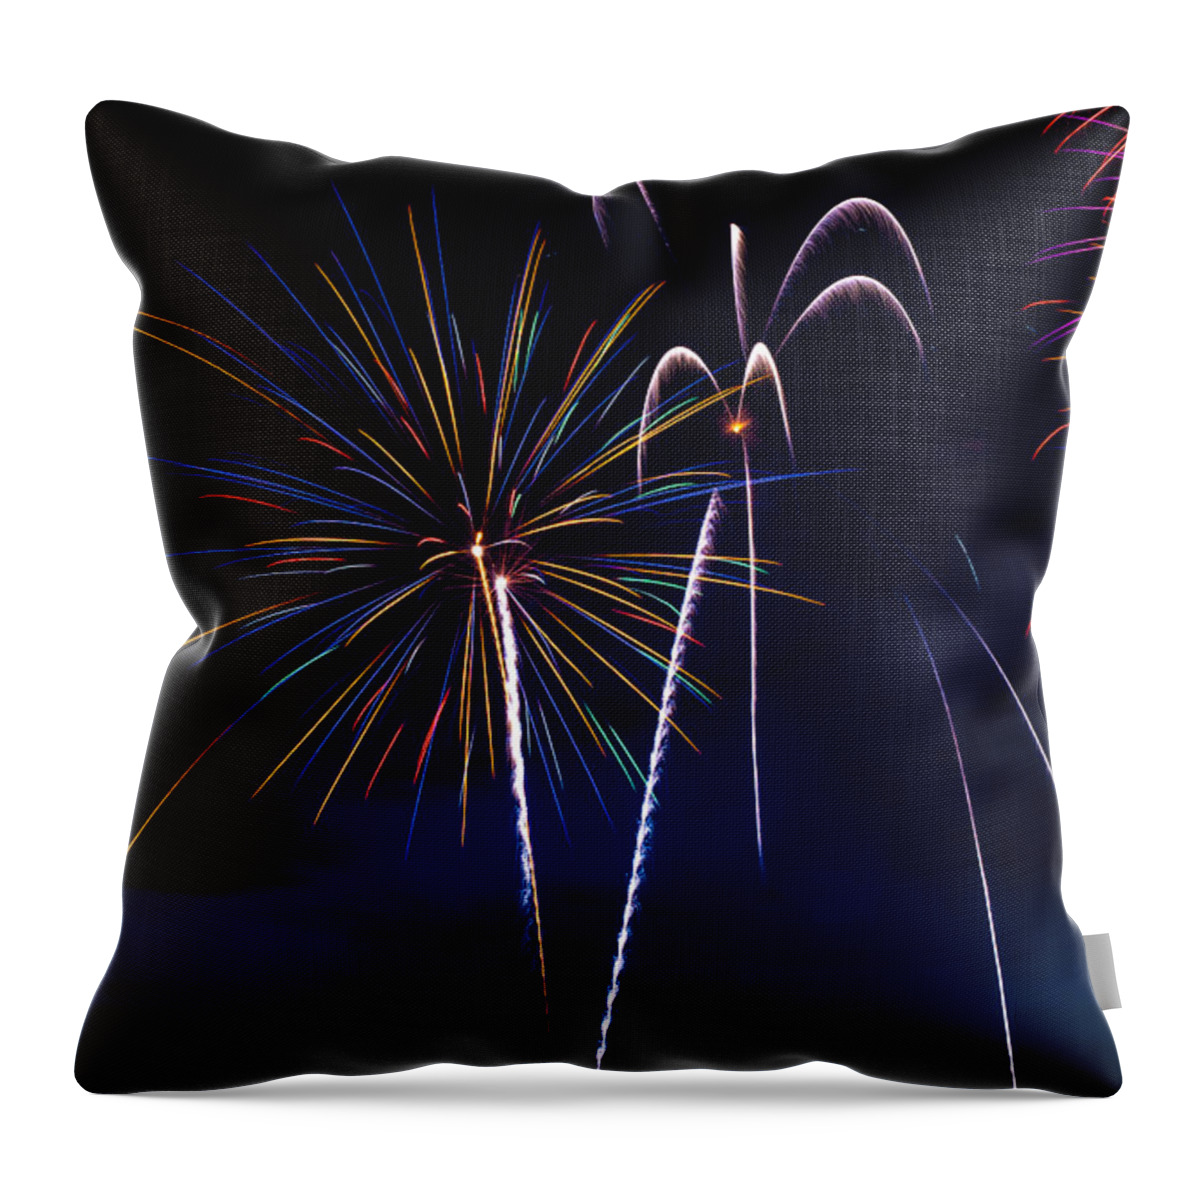 Christopher Holmes Photography Throw Pillow featuring the photograph 20120706-dsc06449 by Christopher Holmes